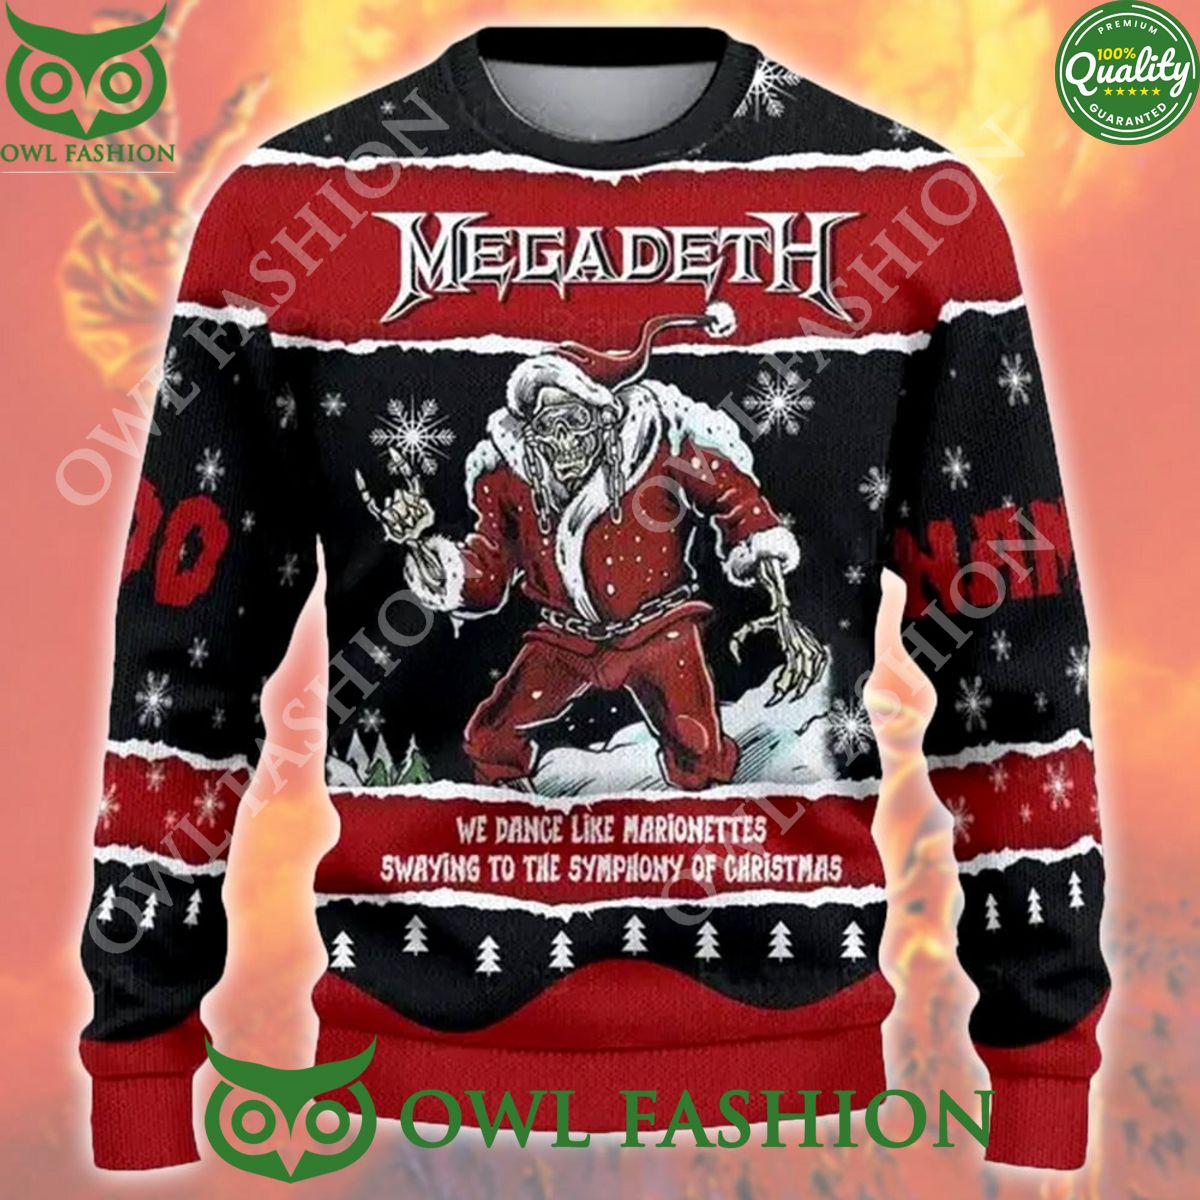 Megadeth Dance like Marionettes Sway Symphony of Christmas ugly sweater jumper Printed